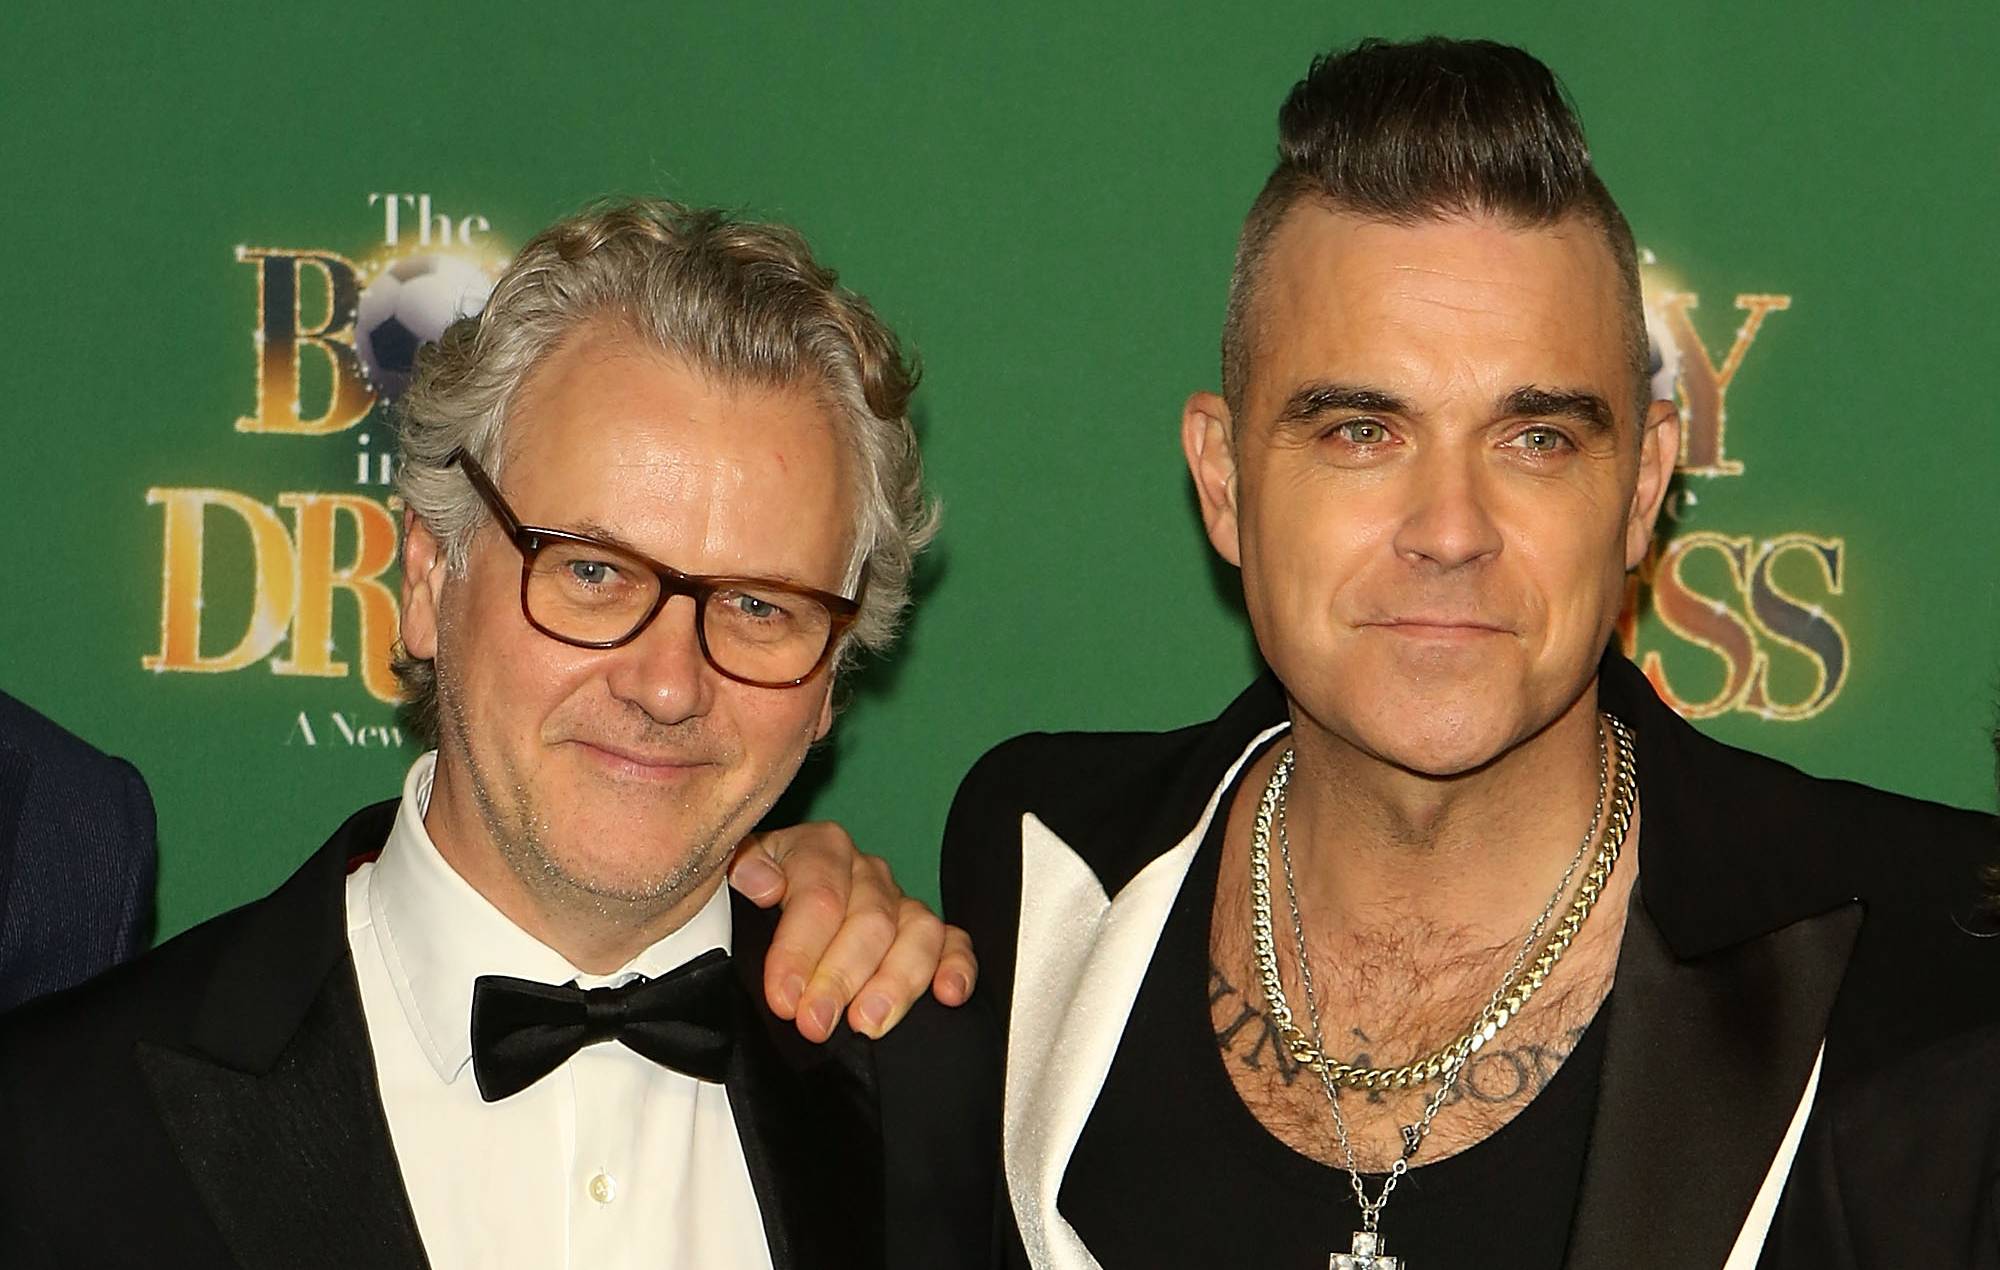 Robbie Williams songwriter Guy Chambers hits out at AI in the music industry